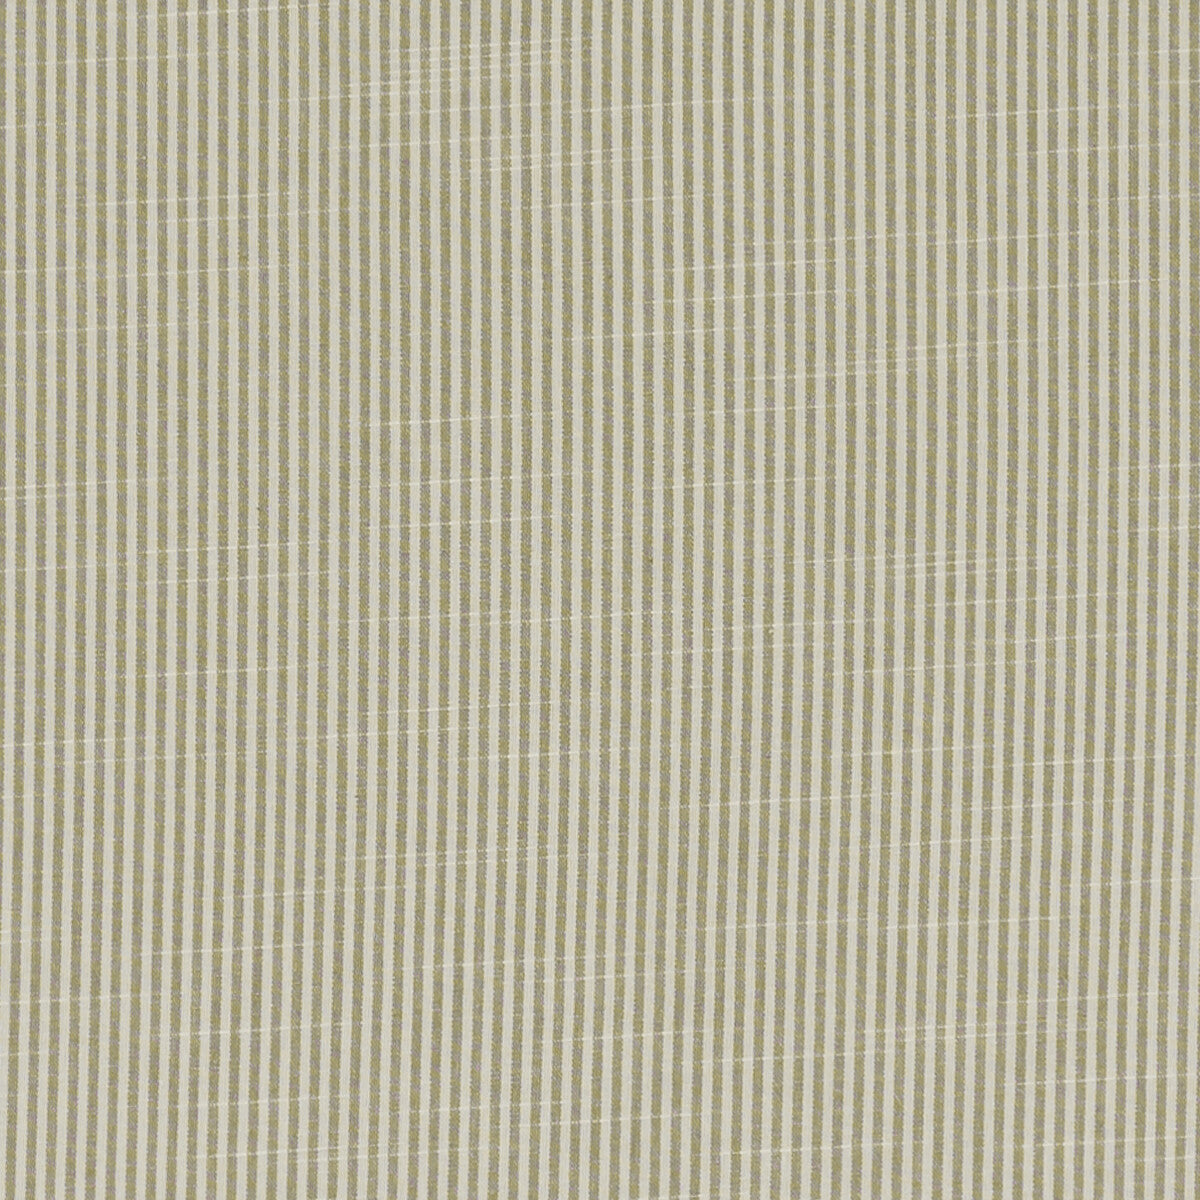 Bempton fabric in natural color - pattern F1307/07.CAC.0 - by Clarke And Clarke in the Bempton By Studio G For C&amp;C collection